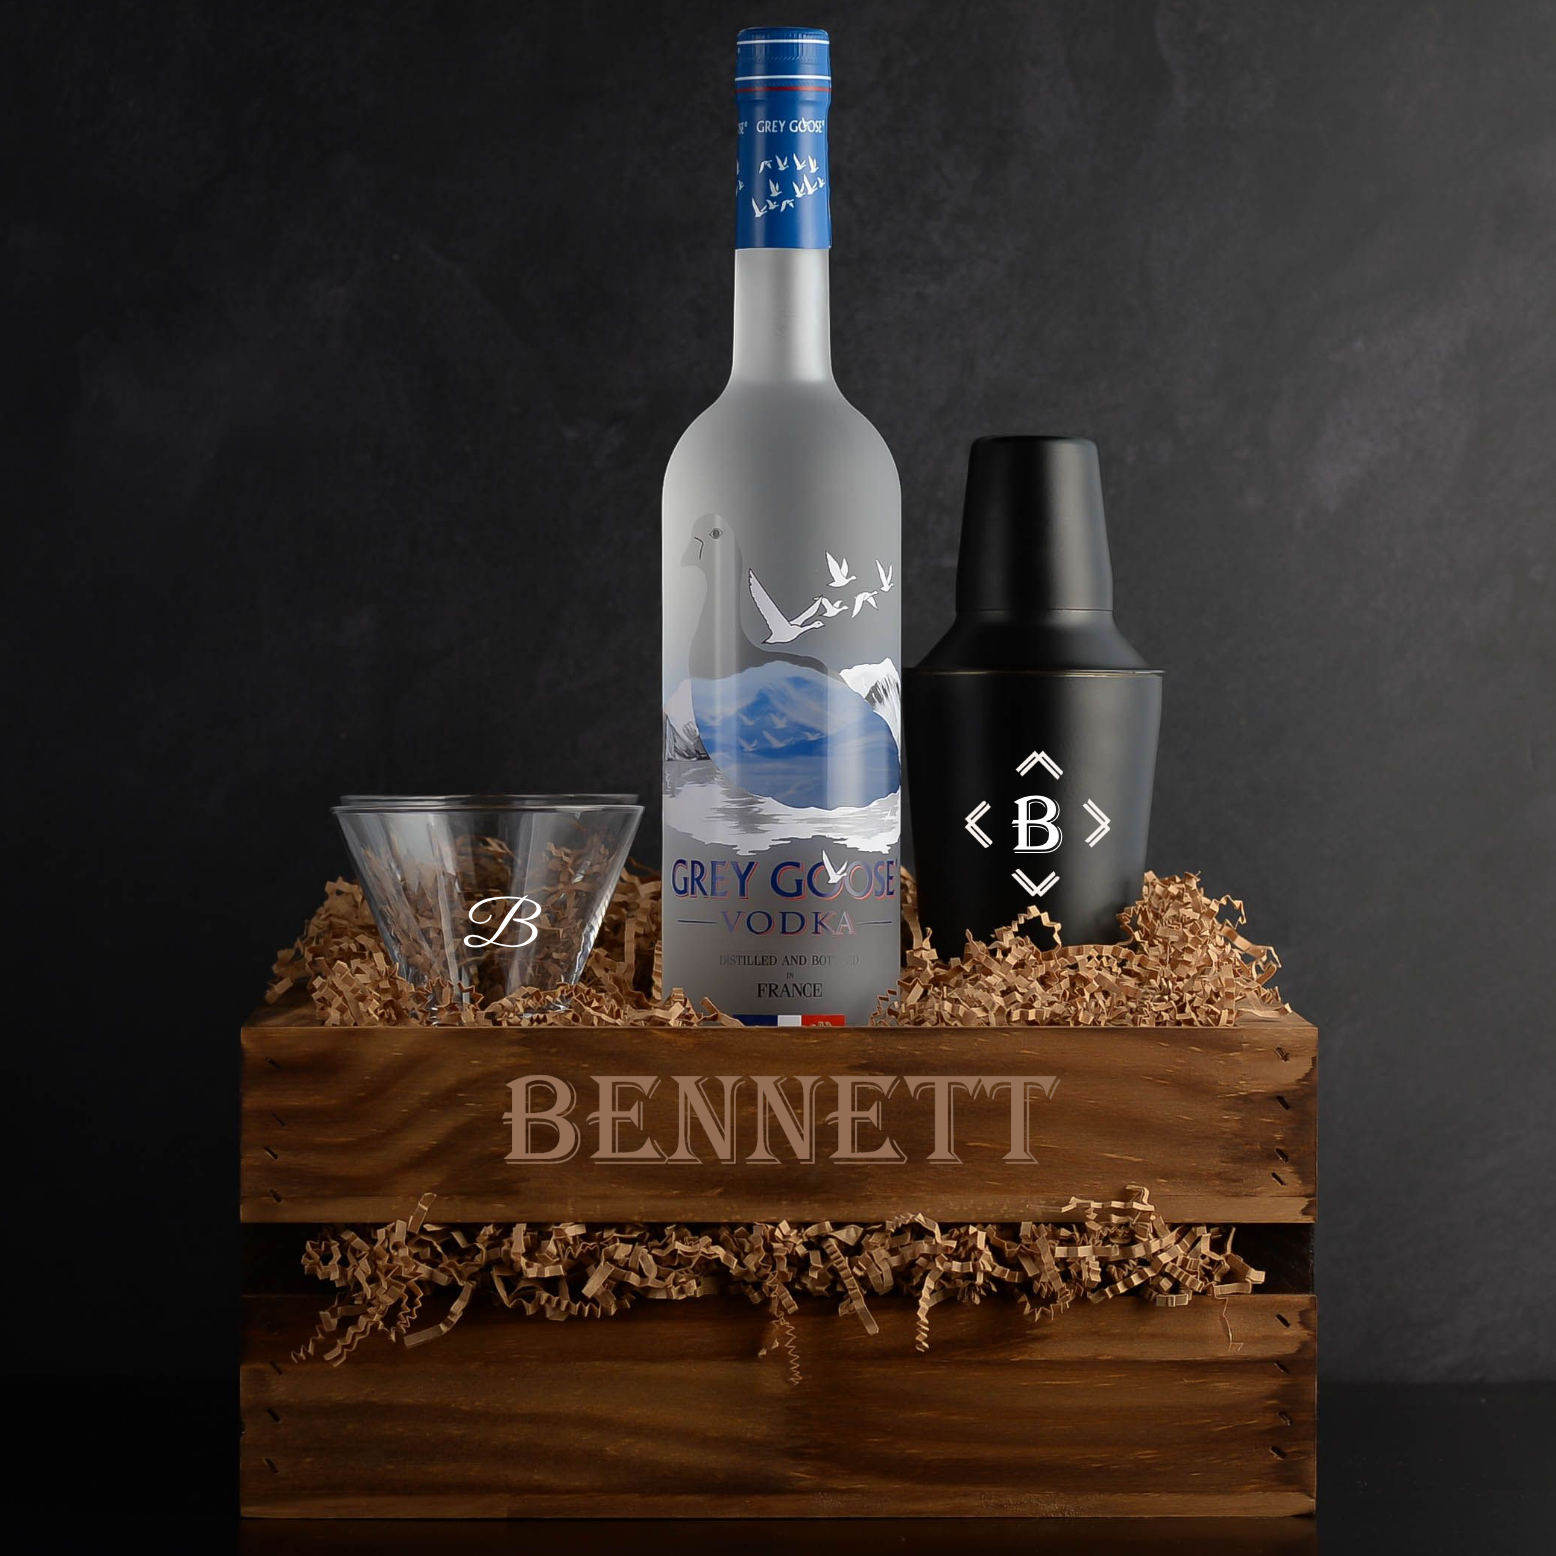 Grey Goose Vodka Martini Gift Set by Elevated Spirit Shop. Includes two stemless martini glasses and a shaker. Gift baskets and sets for any holiday or special occasion.Free engraving. Fast delivery.